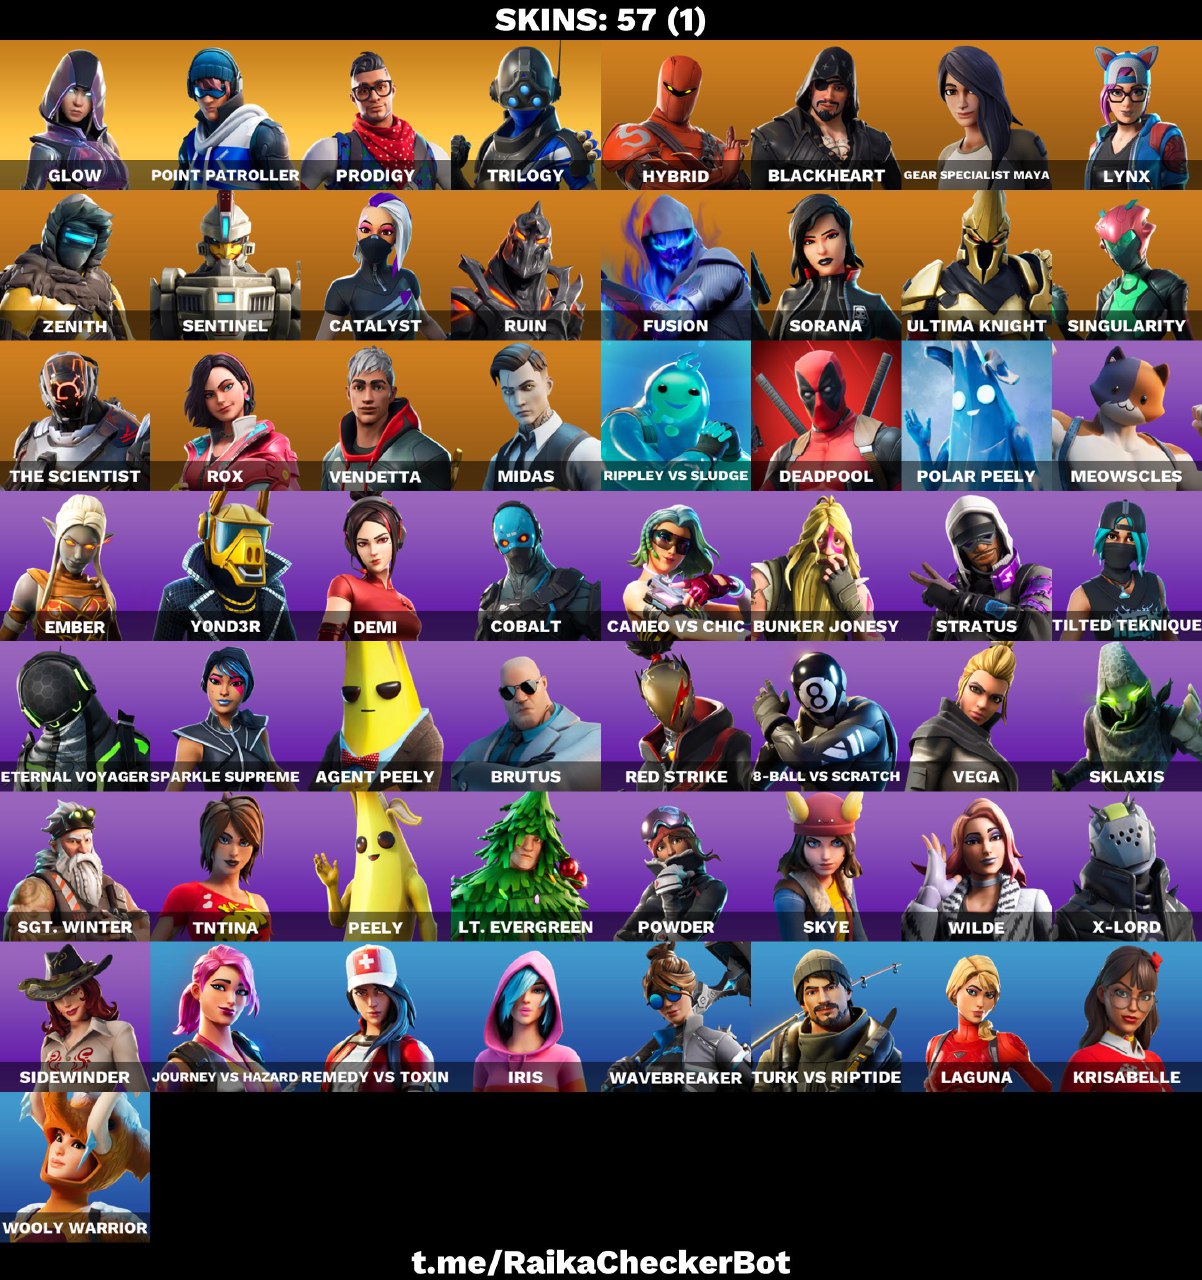 FULL ACCESS | 57 SKINS | GLOW | POINT PATROLLER | PRODIGY | TRILOGY | RELIANT BLUE | TABULATOR | RECON STRIKE | COAXIAL BLUE | FUSION COIL |